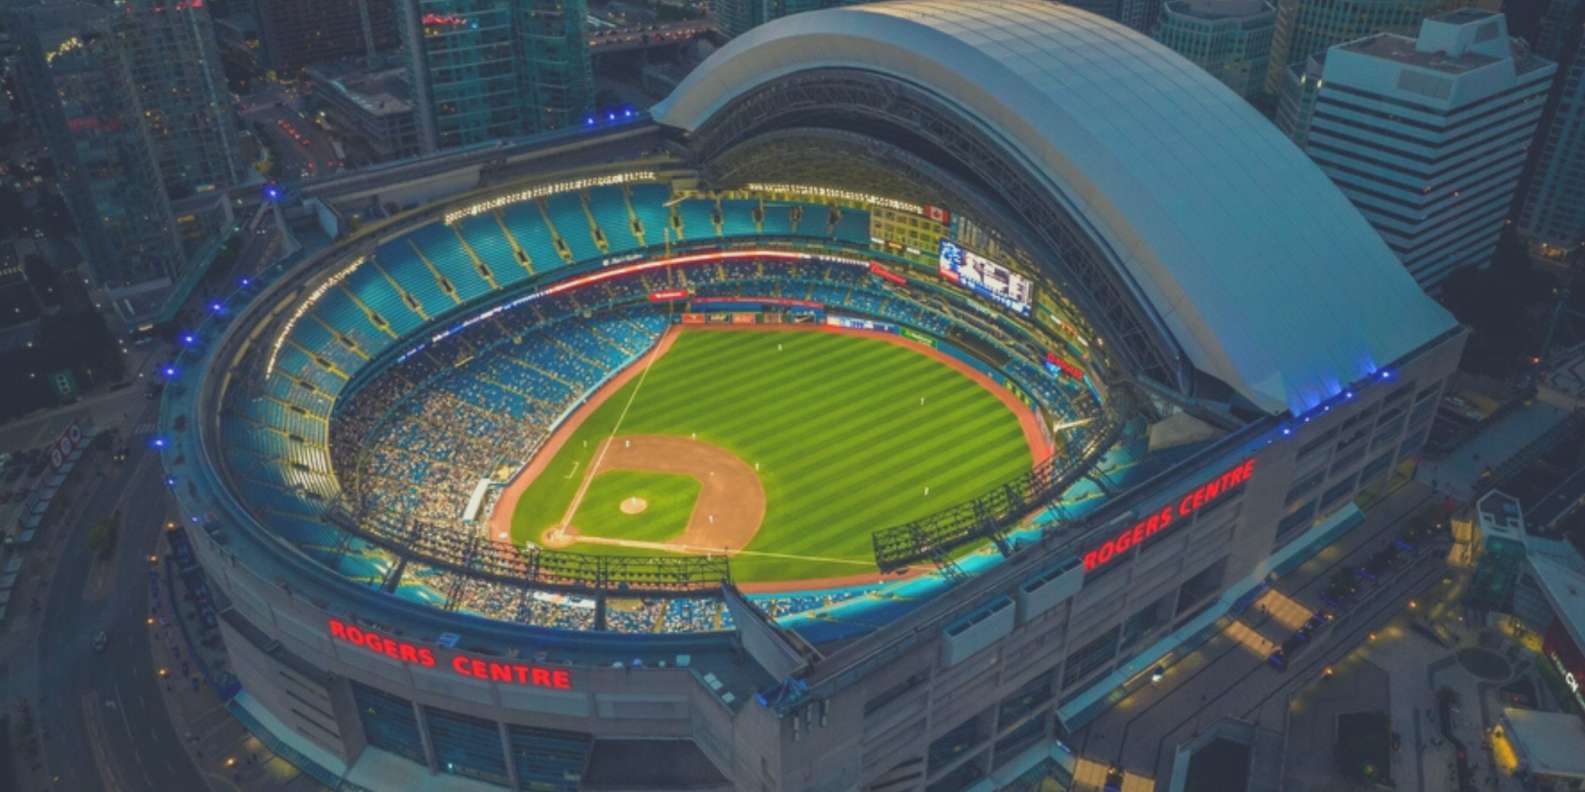 A fan's guide to the revamped Rogers Centre: Best sections, food, drinks